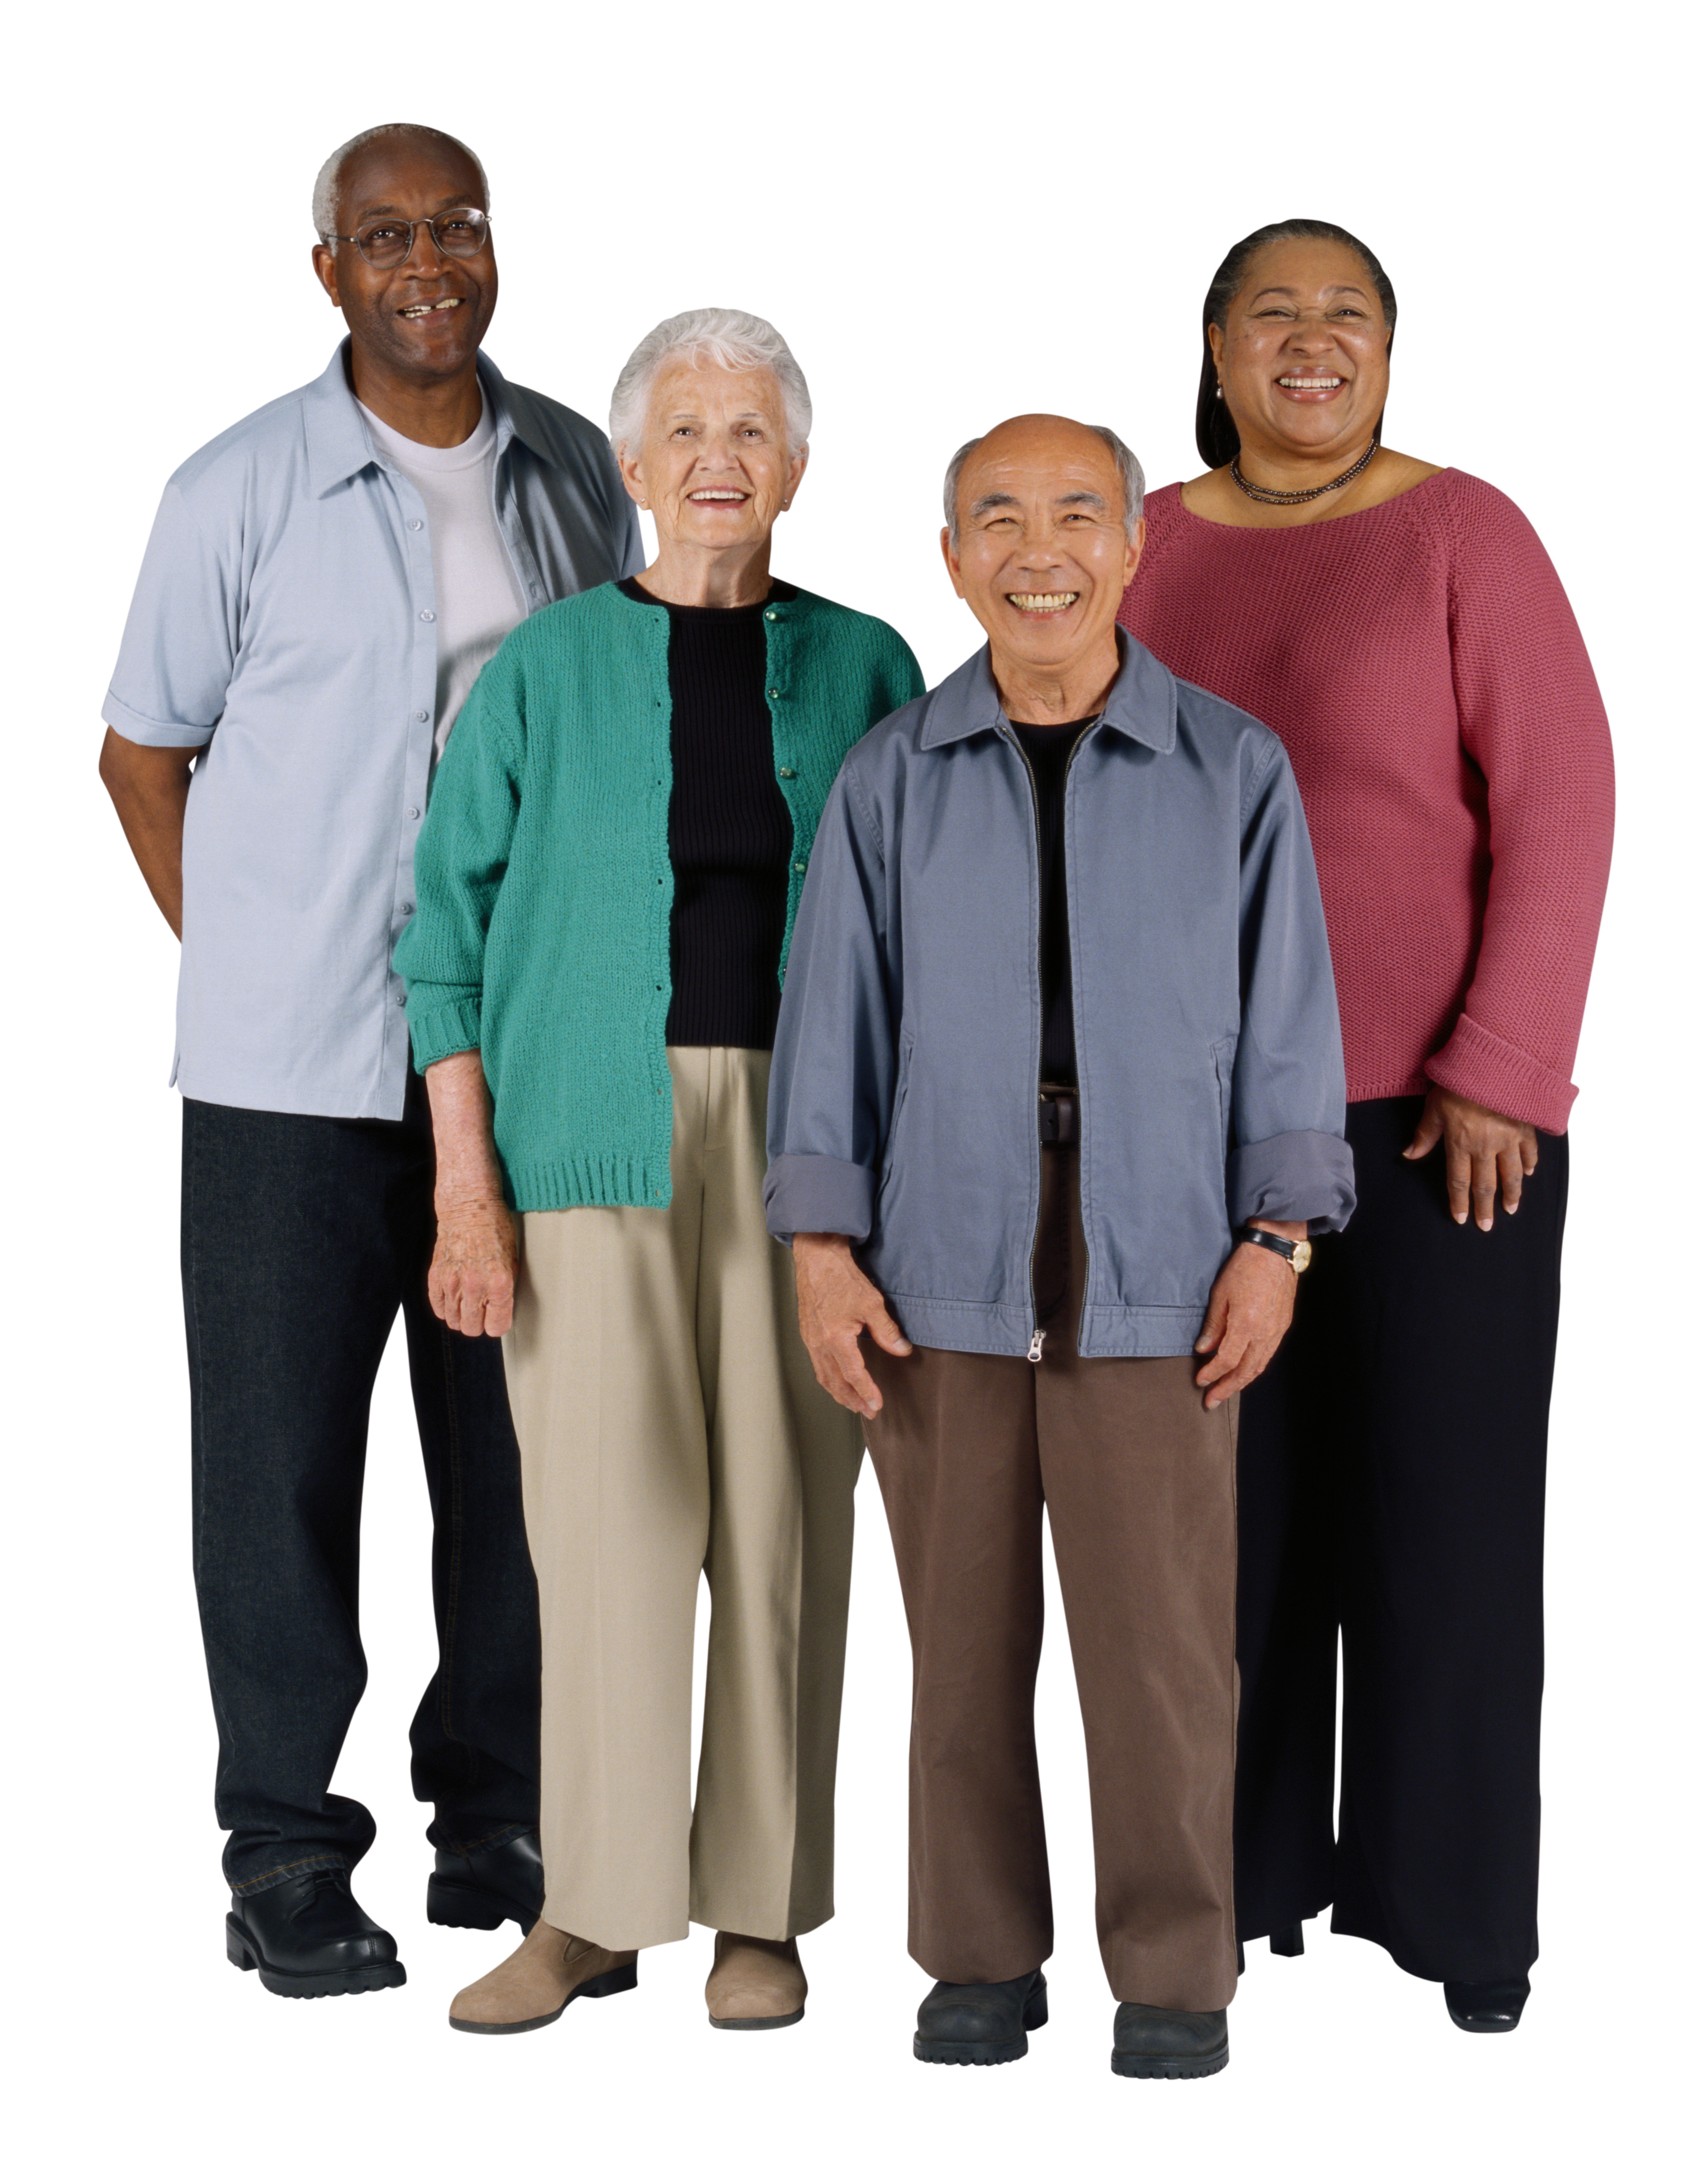 Four older adults standing together